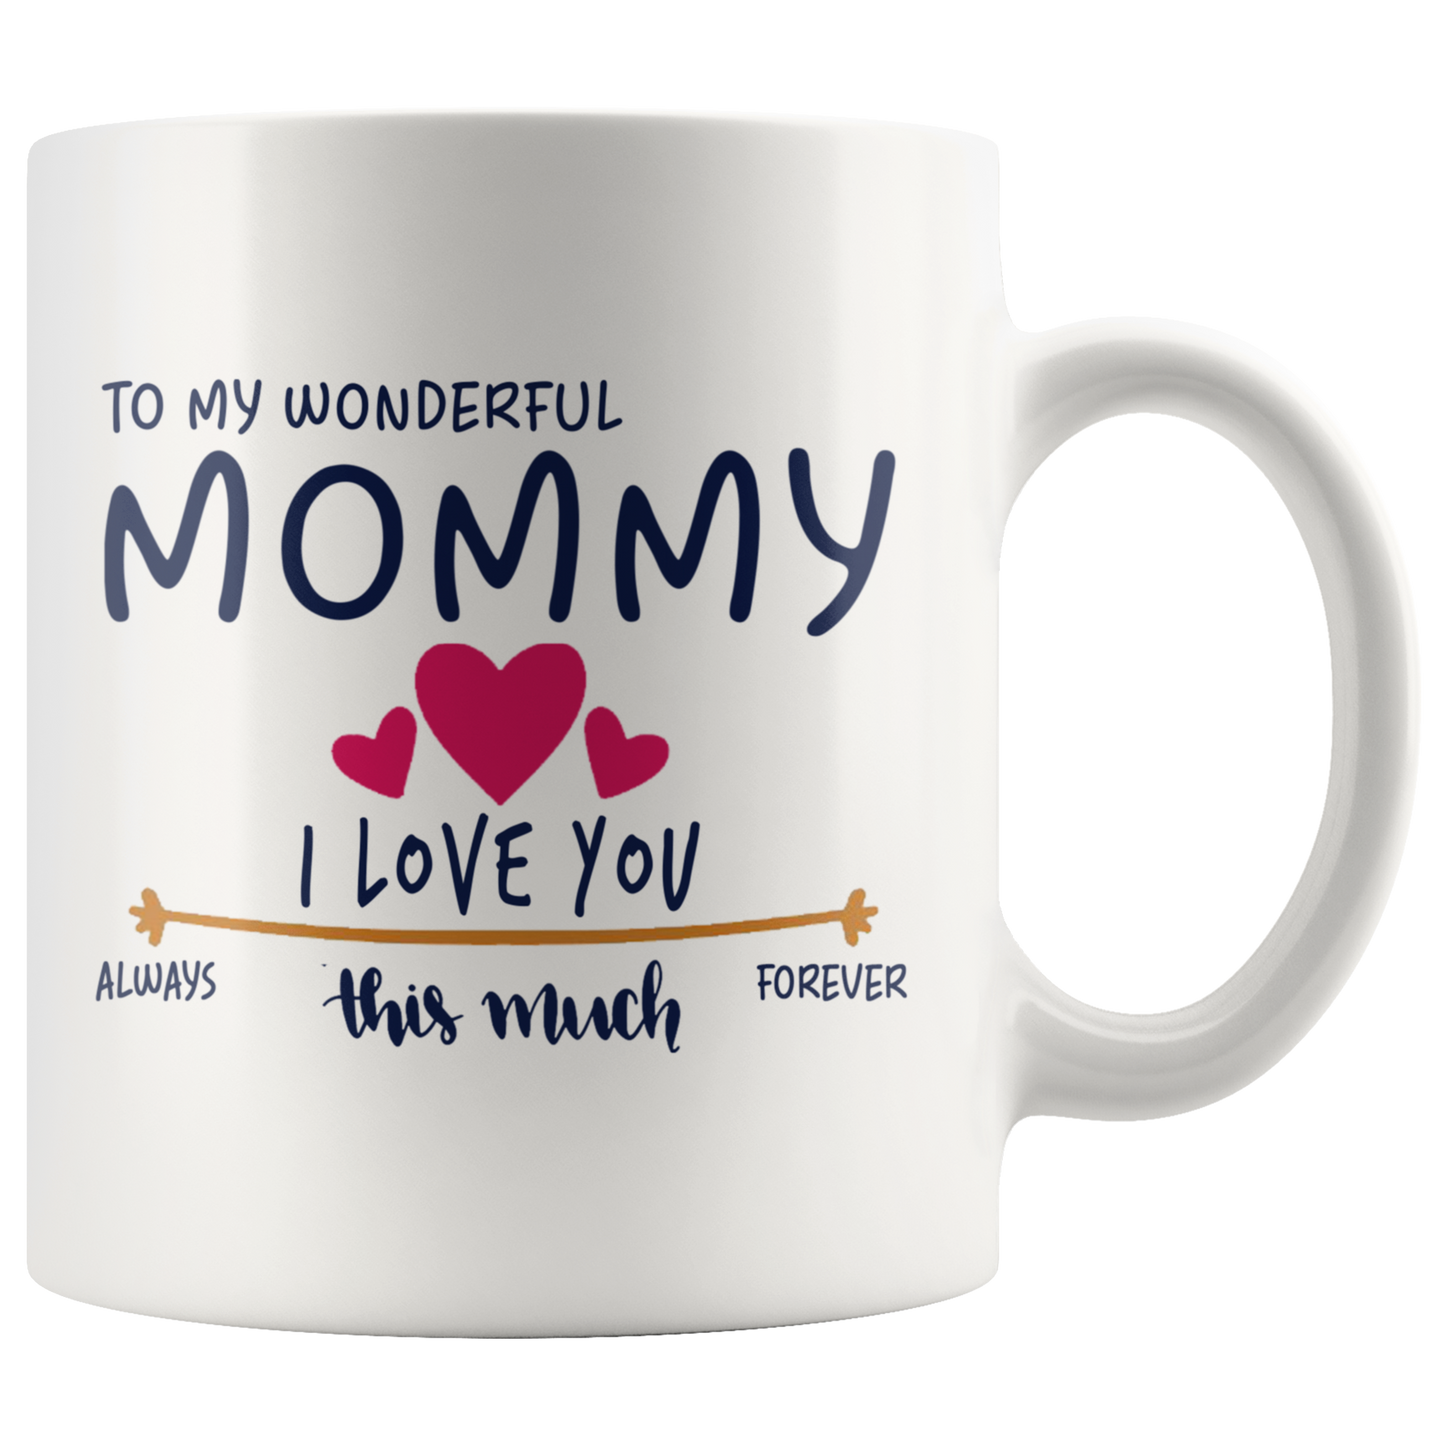 M-20470216-sp-23763 - [ Mommy | 1 ]Mom Day Gifts From Daughter or Son - To My Wonderful Mommy I